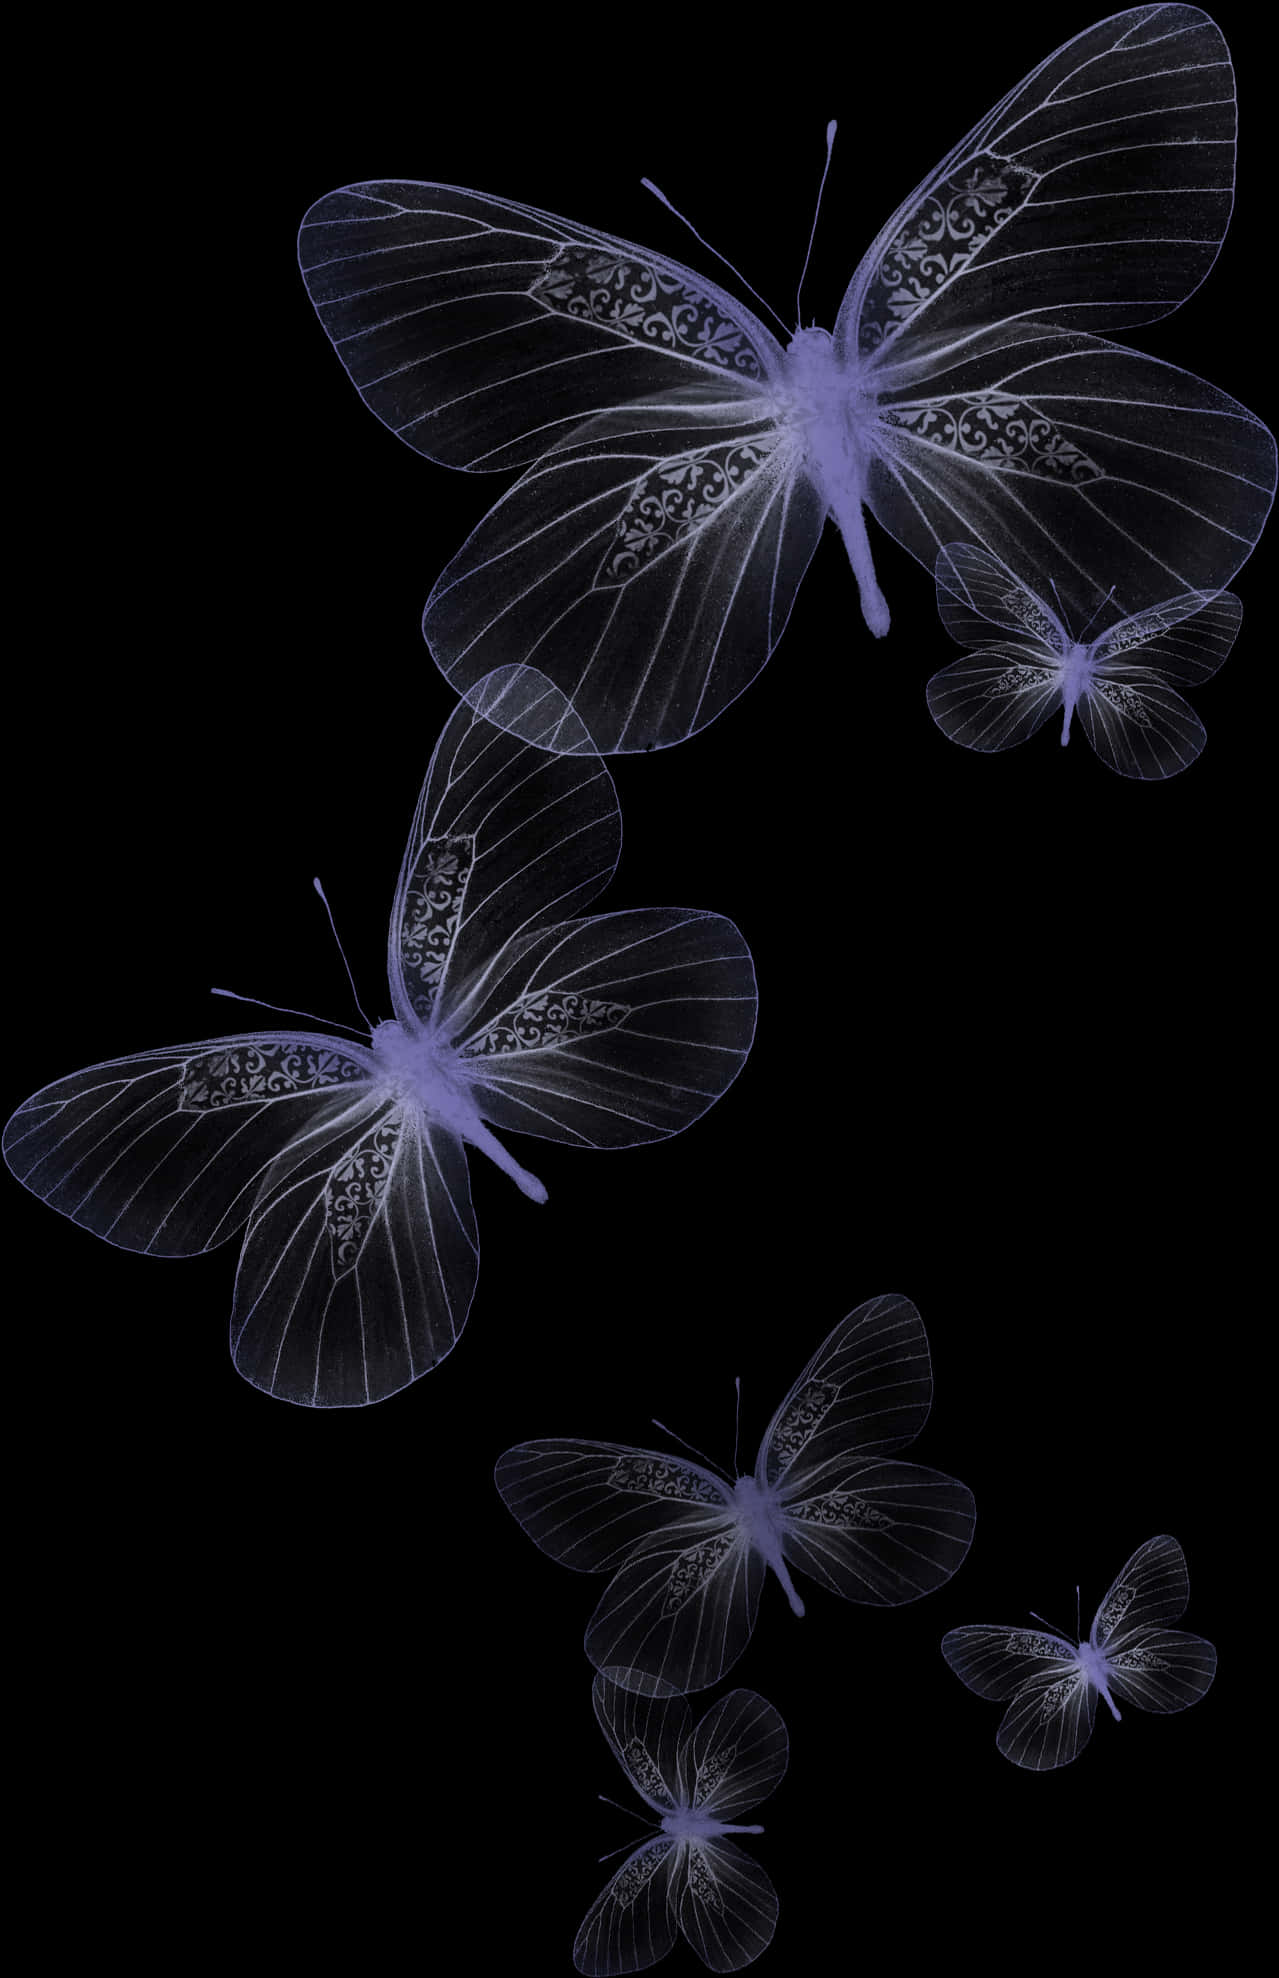 A Group Of Butterflies With White Wings